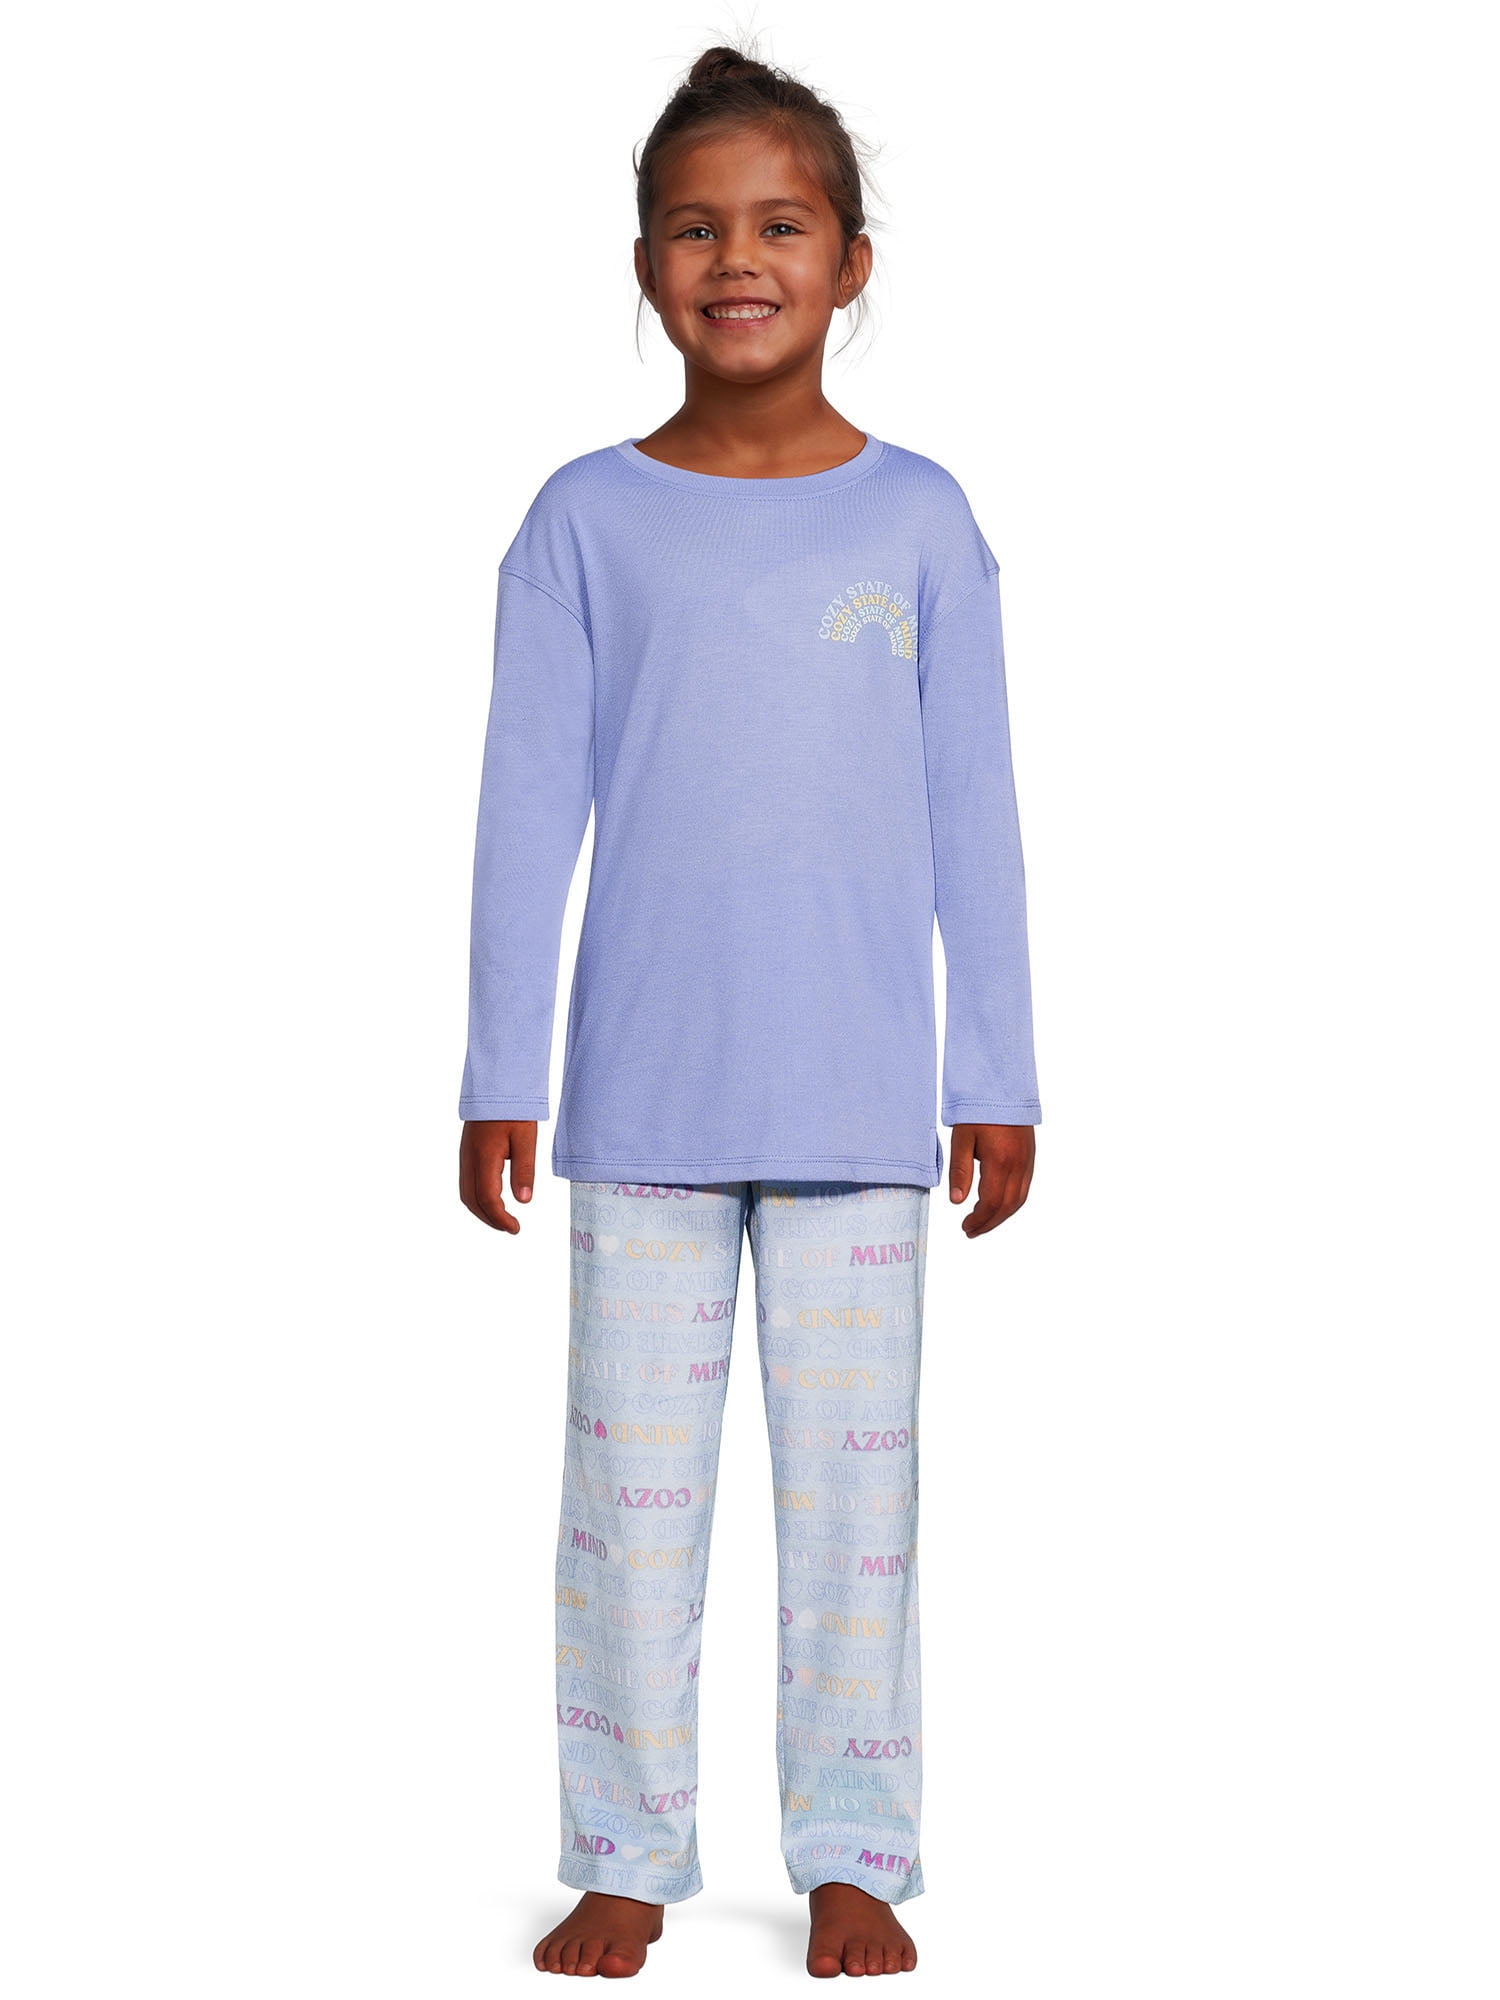 Wonder Nation Girls Long Sleeve Top and Jersey Pants with Knit Flannel,  2-Piece Pajama Sleep Set, Sizes 4-18 & Plus 